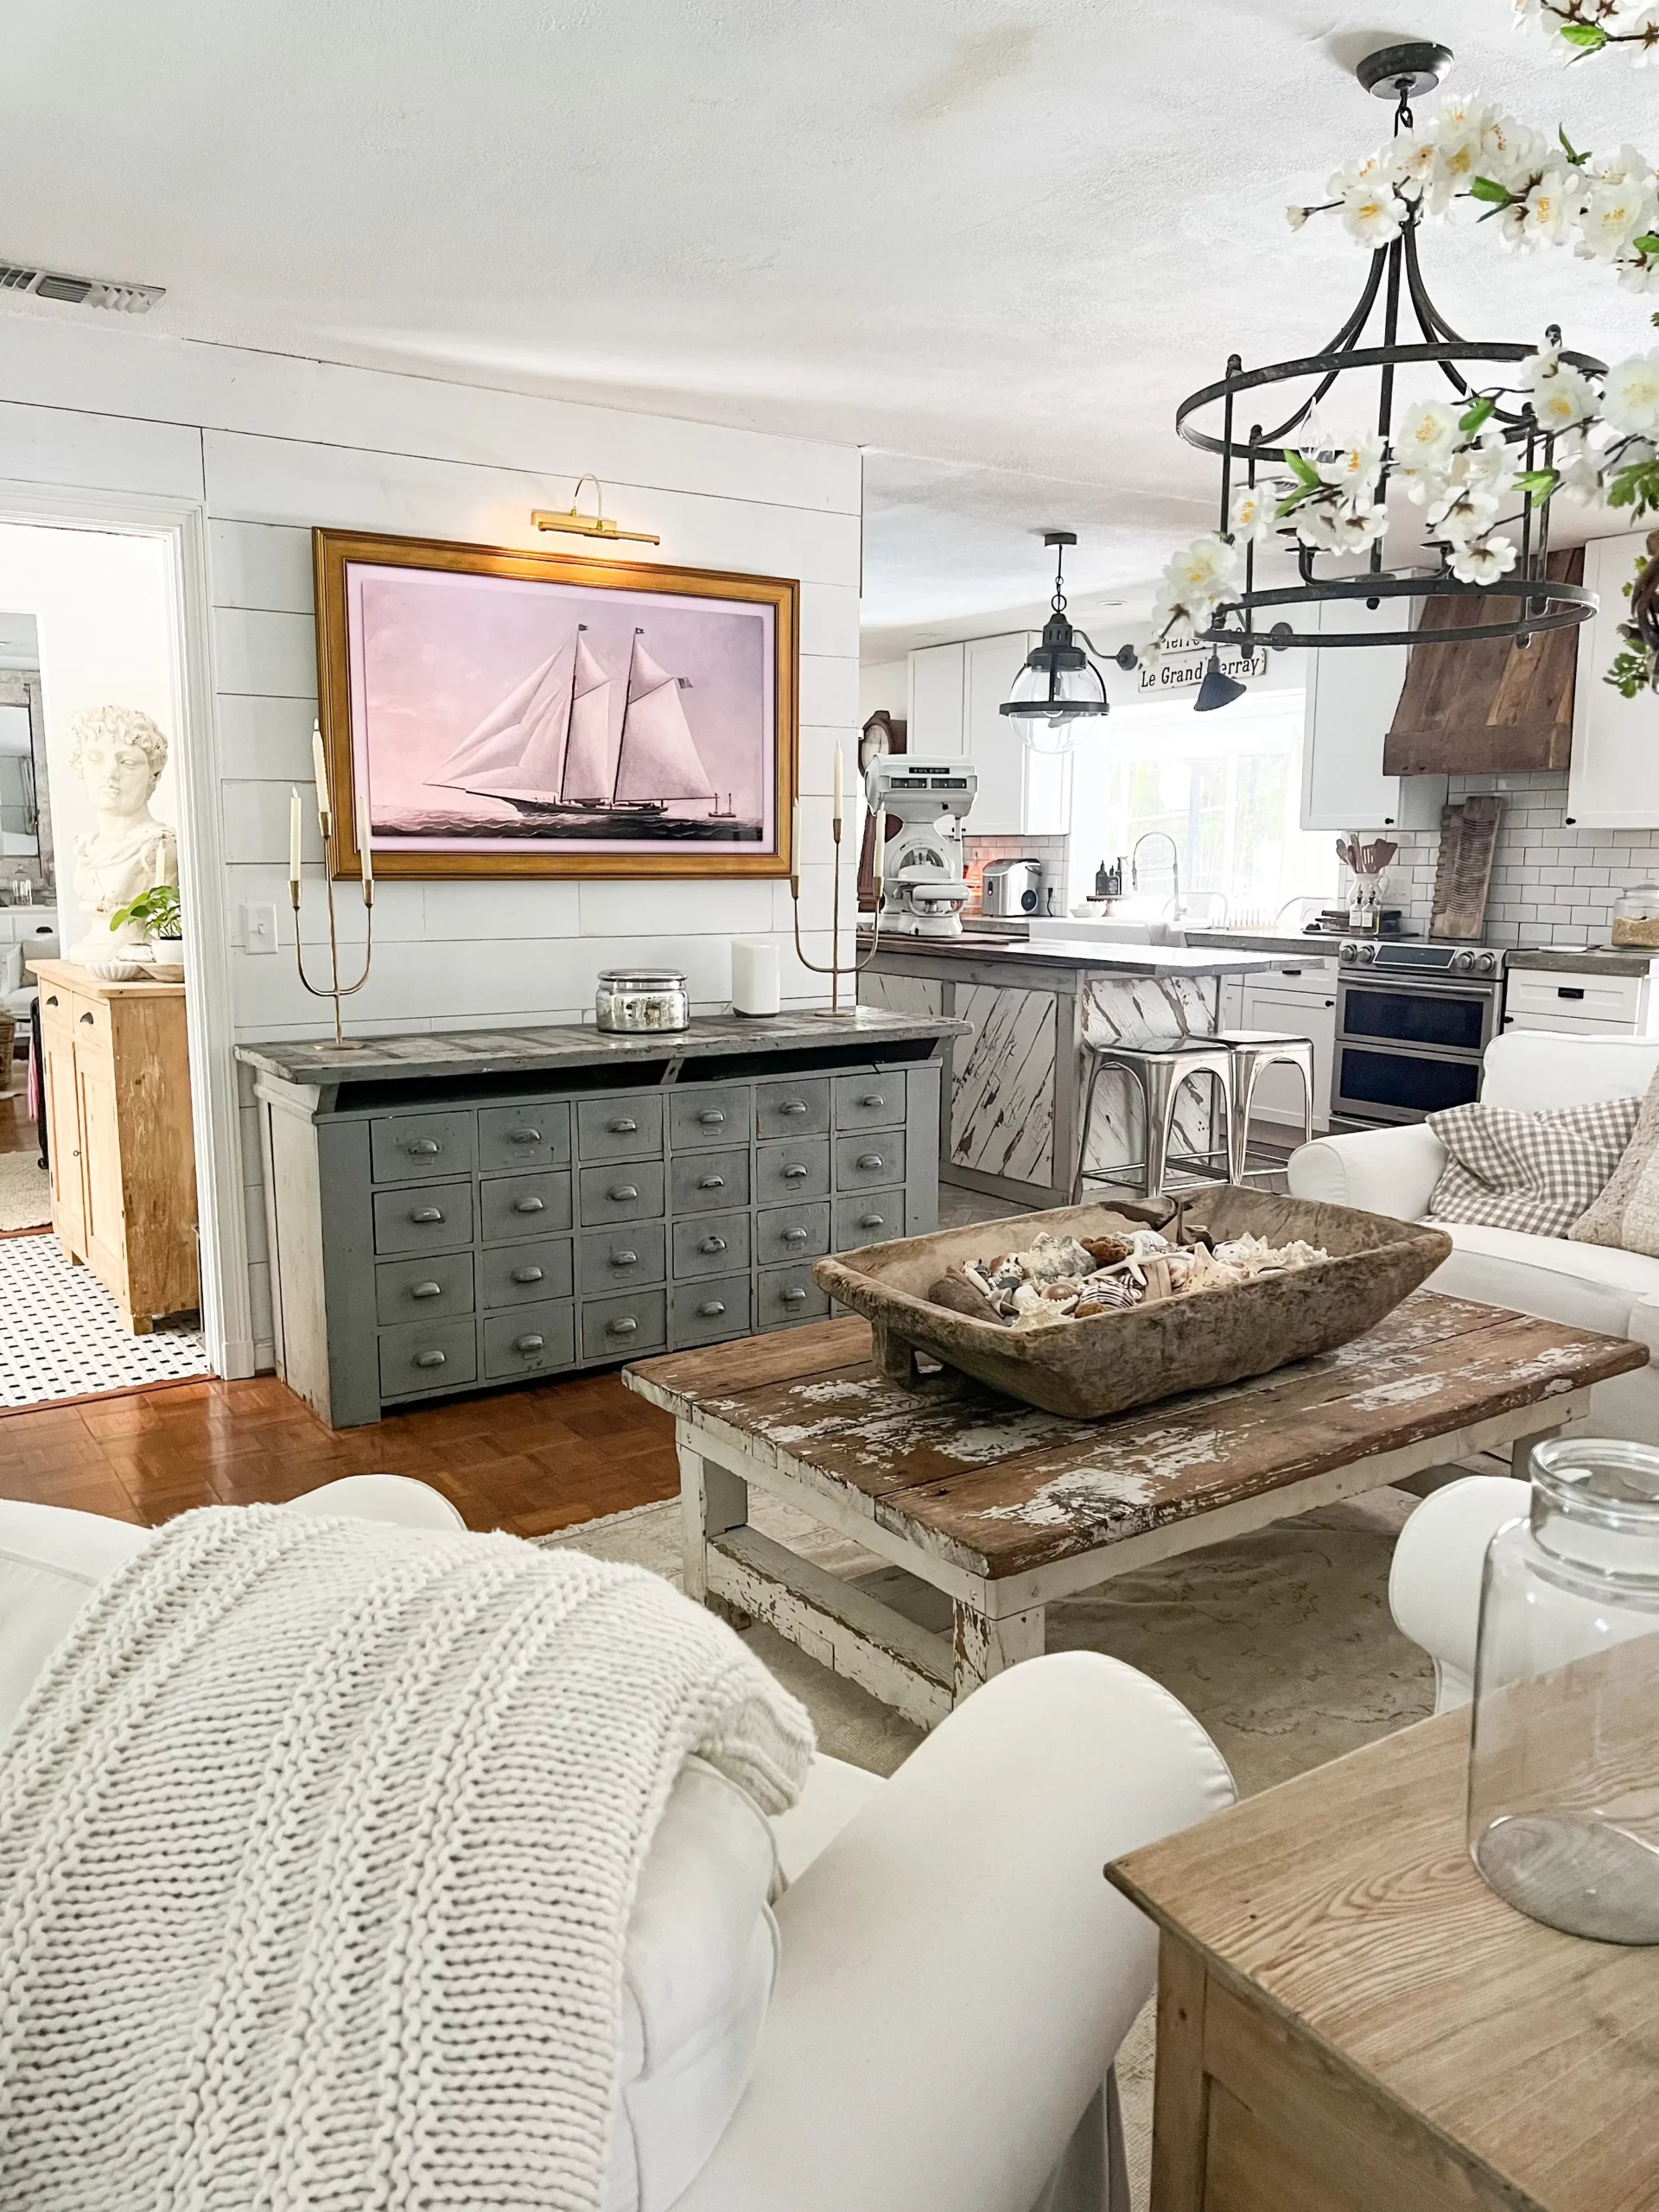 wide angle of a family room with a TV framed with a gold frame and a beautiful sailboat painting on the TV